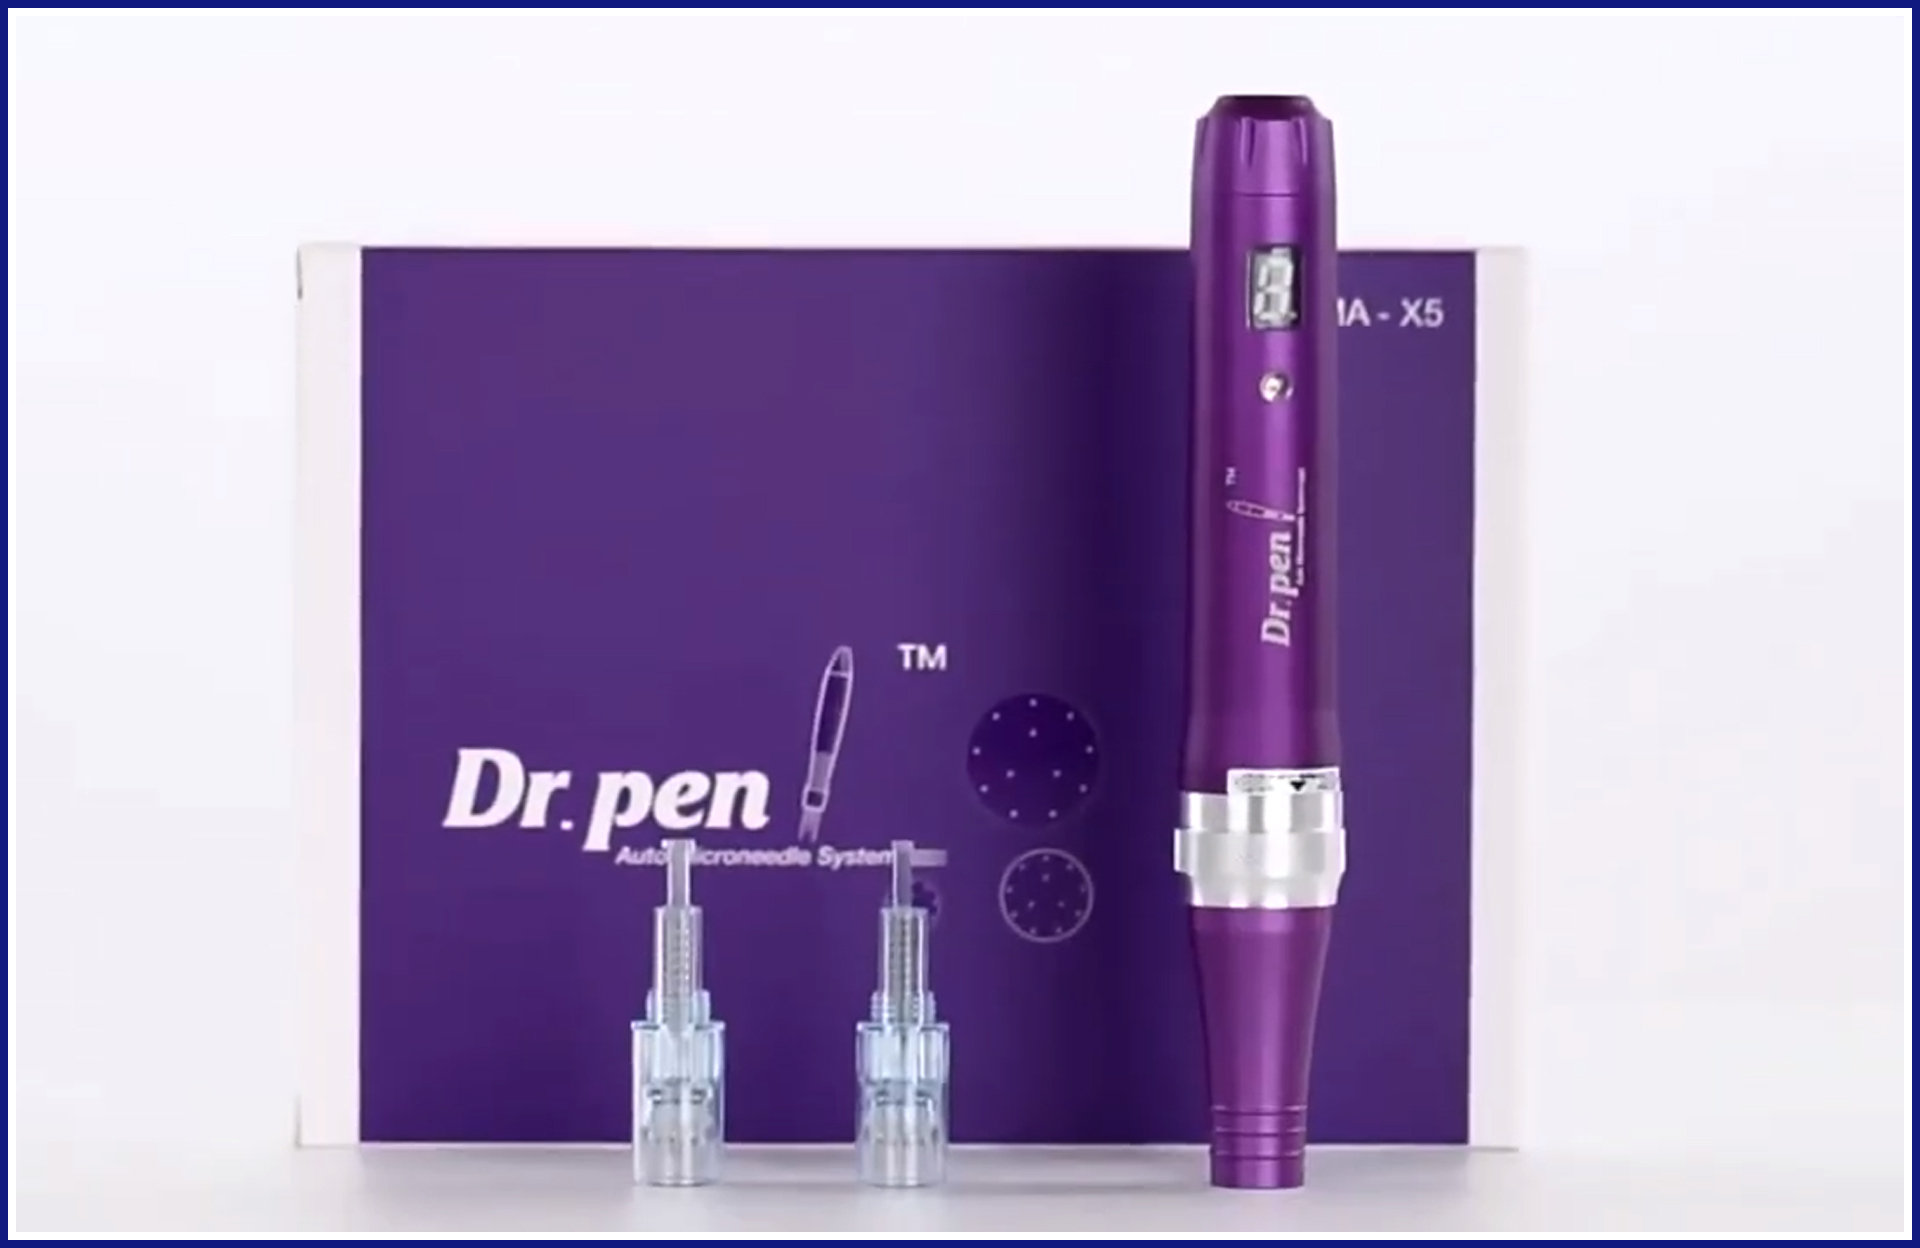 Introducing the Dr. Pen DP-X5 Microneedling Pen: Your Key to Youthful Skin!